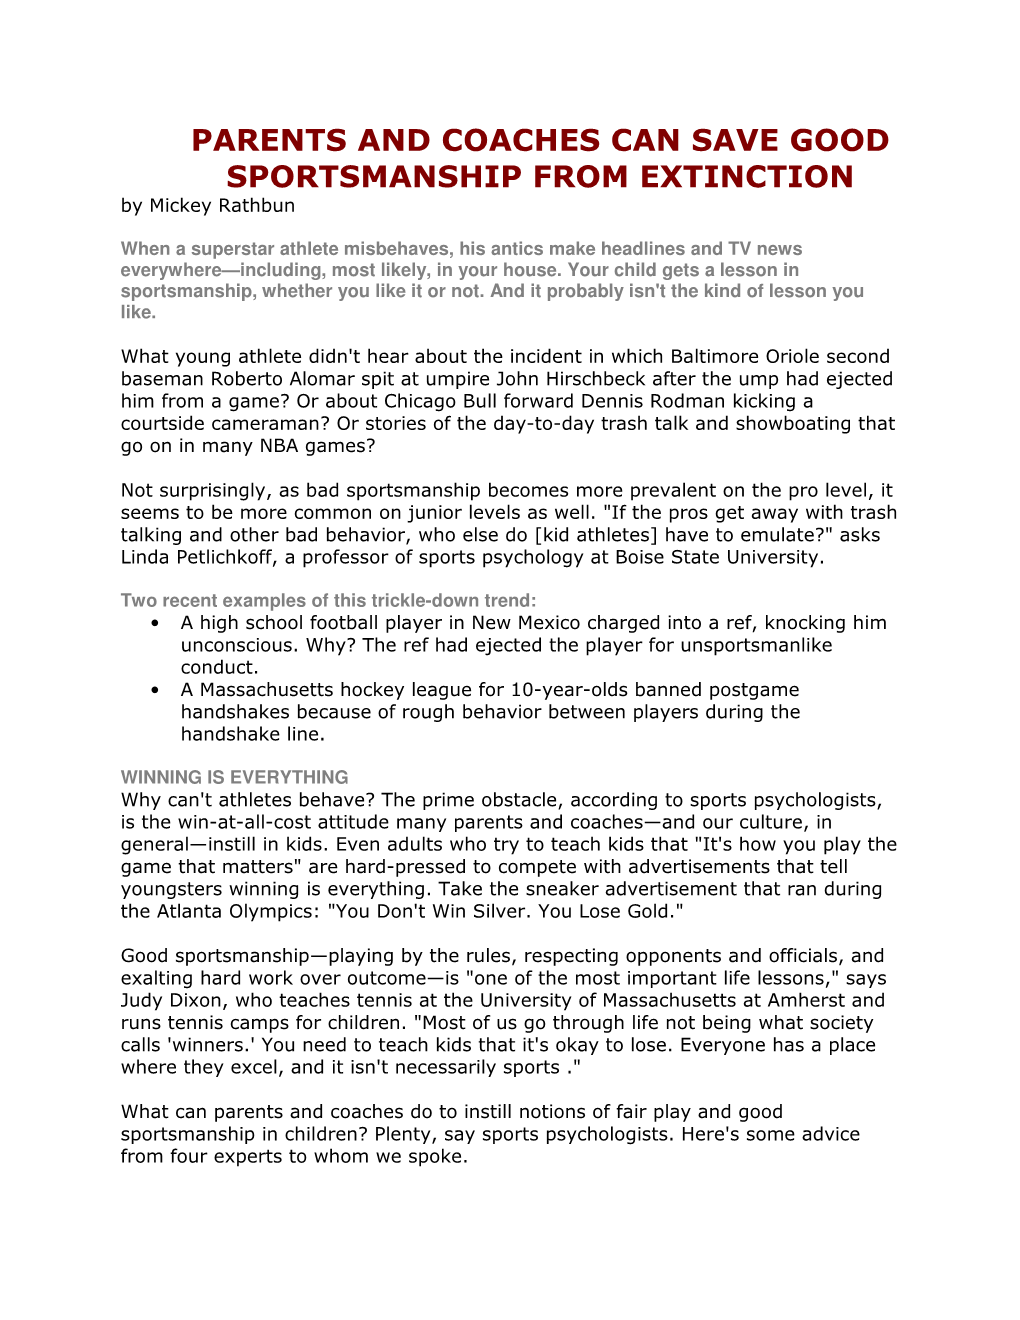 PARENTS and COACHES CAN SAVE GOOD SPORTSMANSHIP from EXTINCTION by Mickey Rathbun